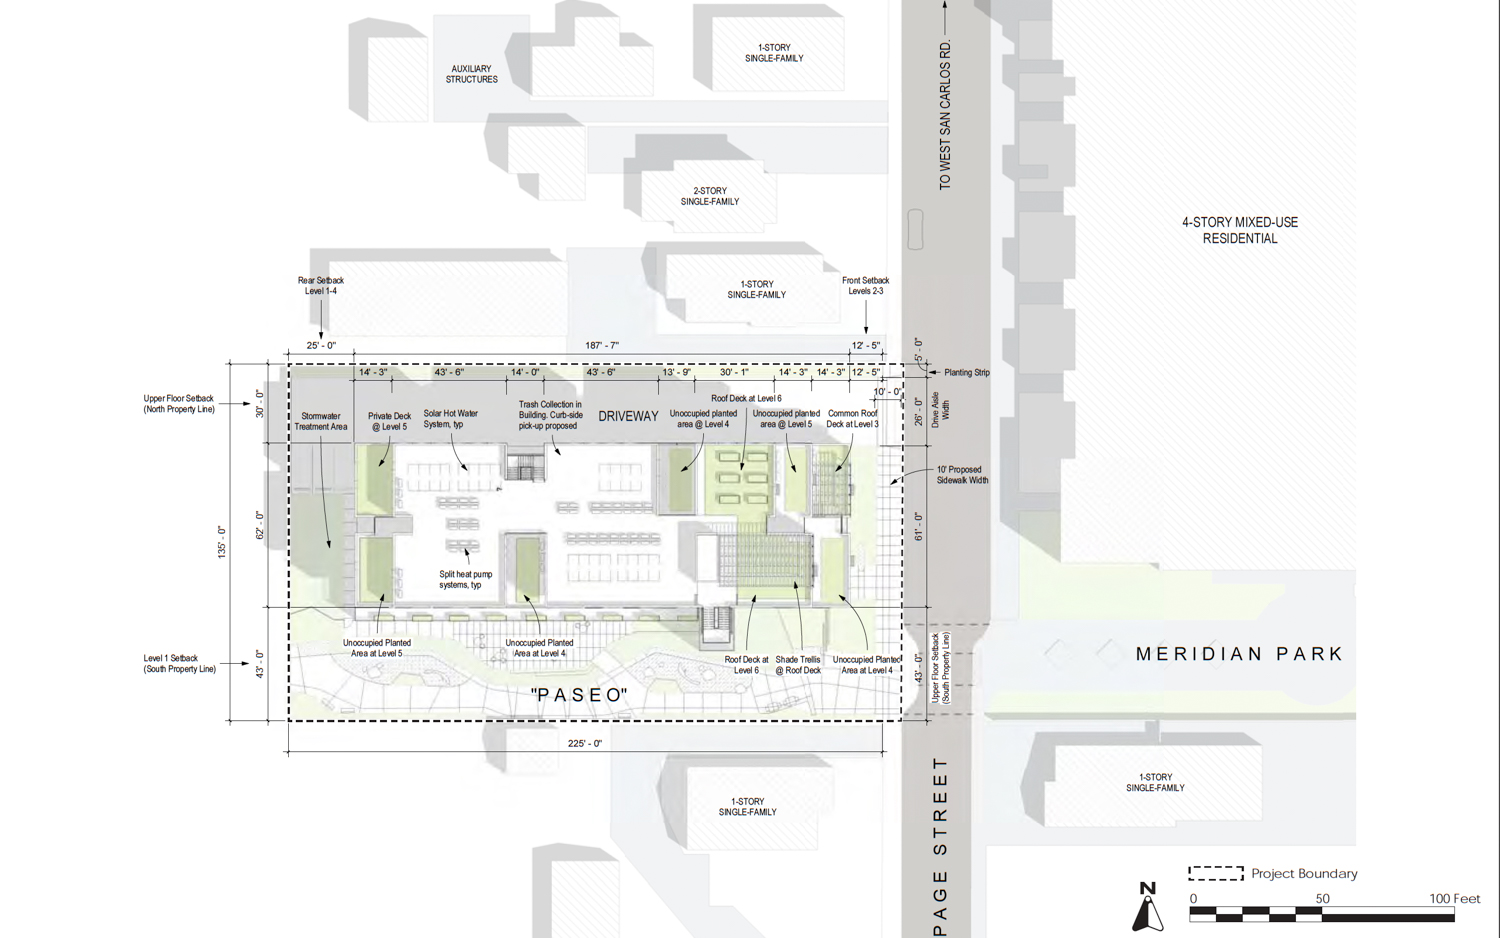 329 Page Street site map, illustration by Form/Work